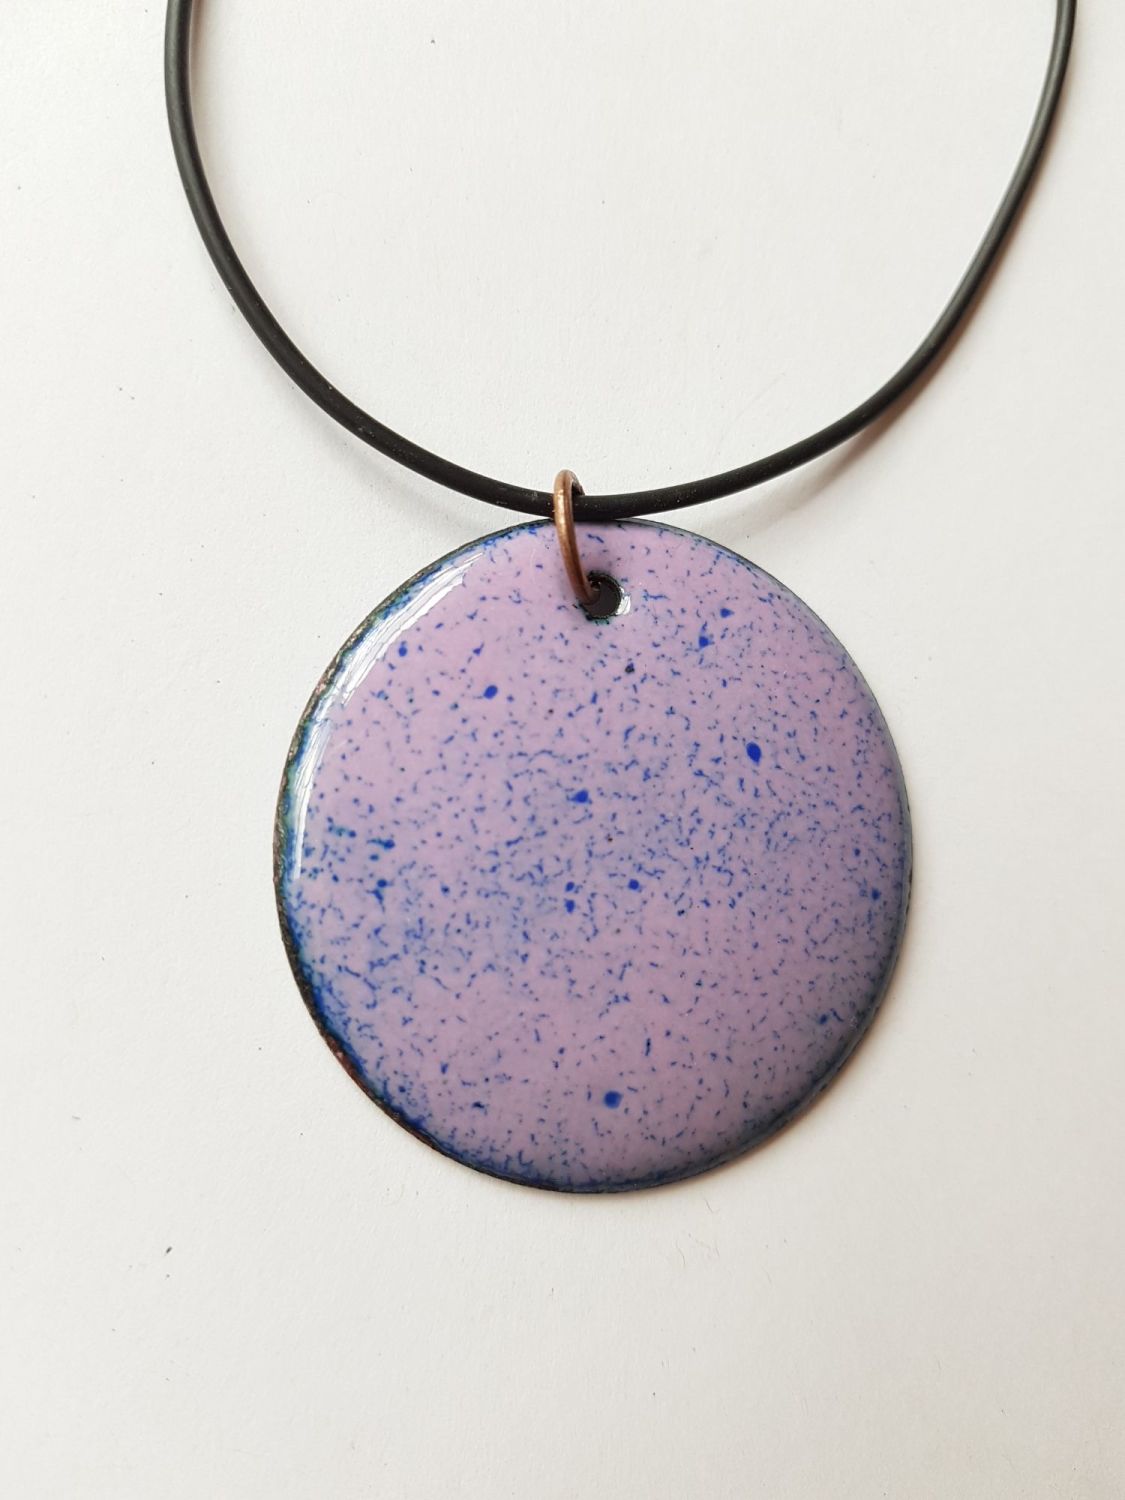 Enamelled copper pendant in mauve with royal blue speckles.